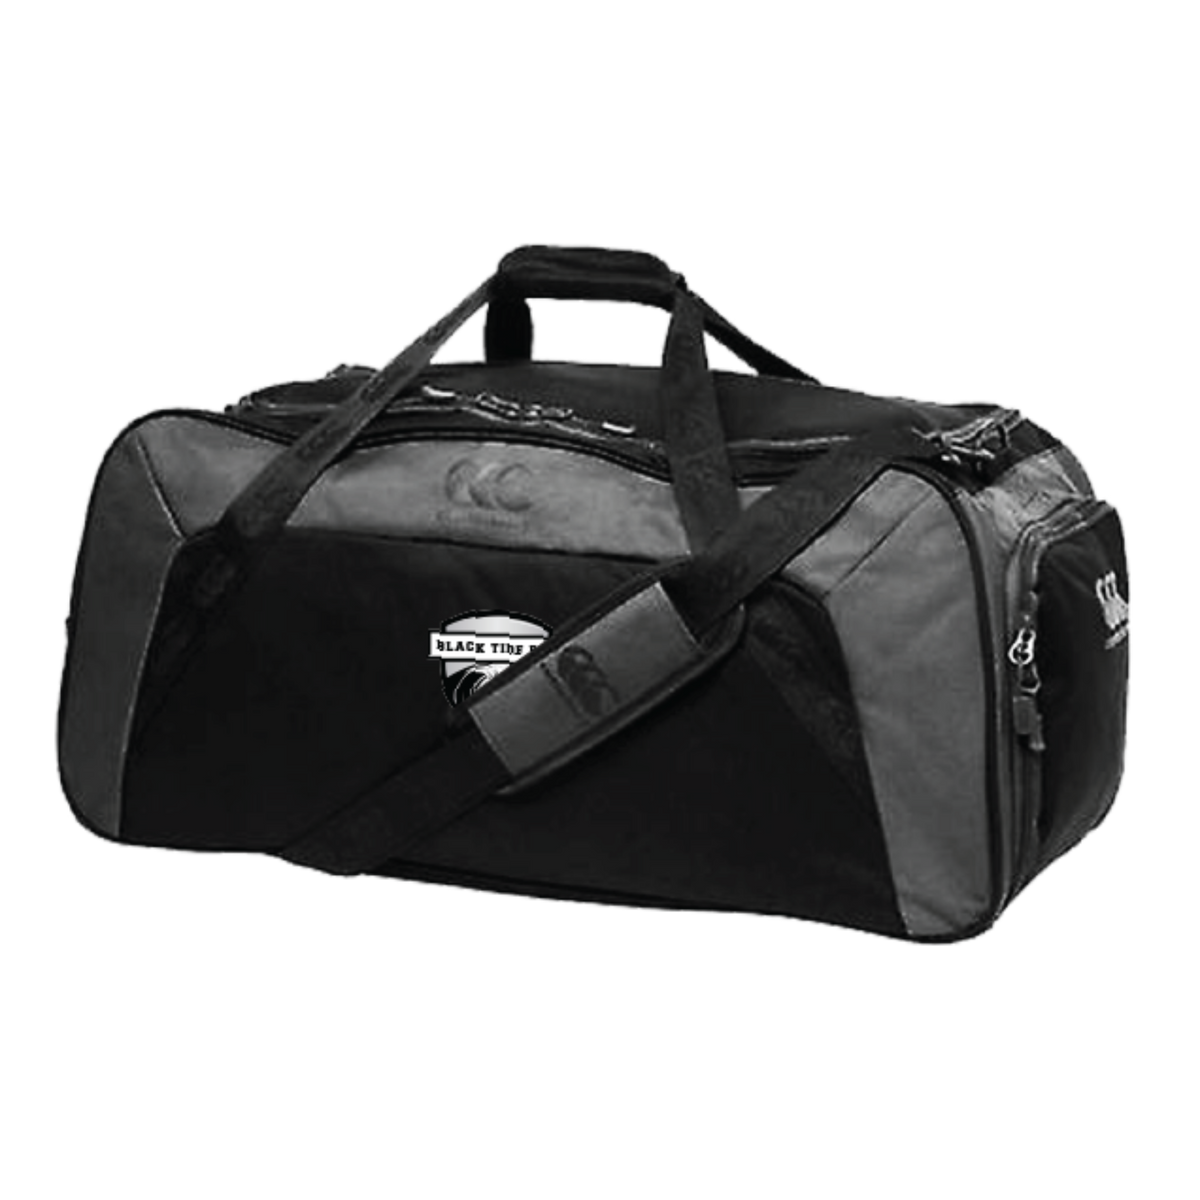 Moncton Black Tide CCC Classic Holdall Duffle